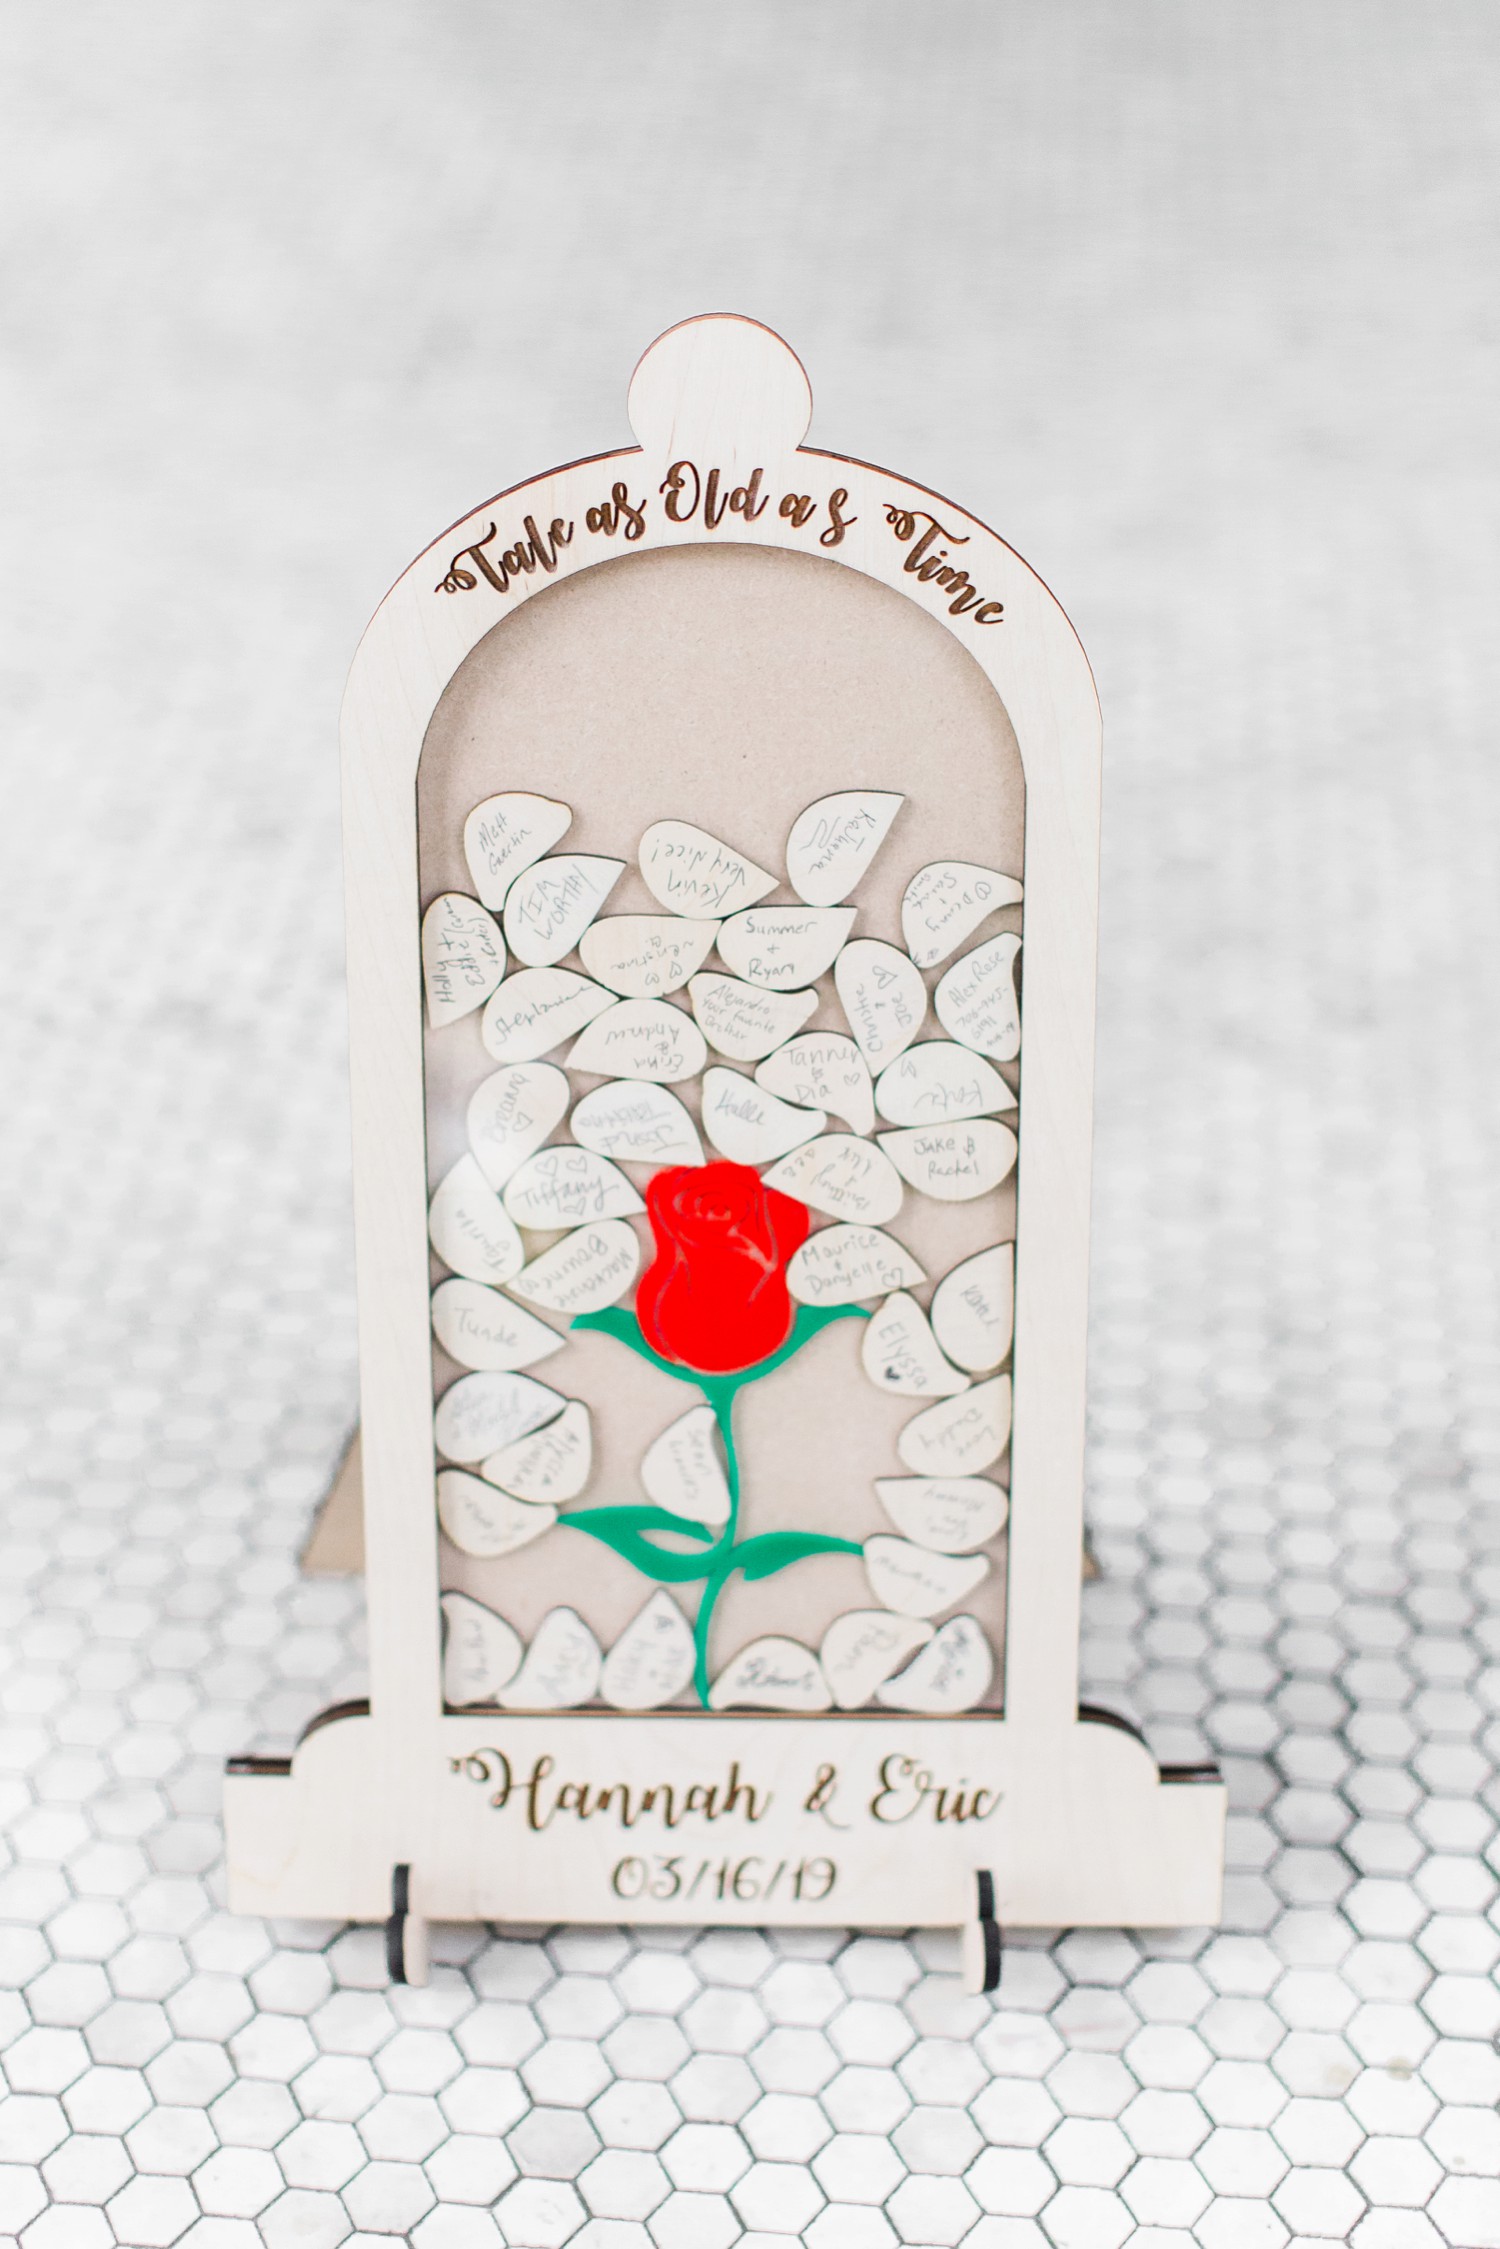 Loving this Disney inspired guest book!